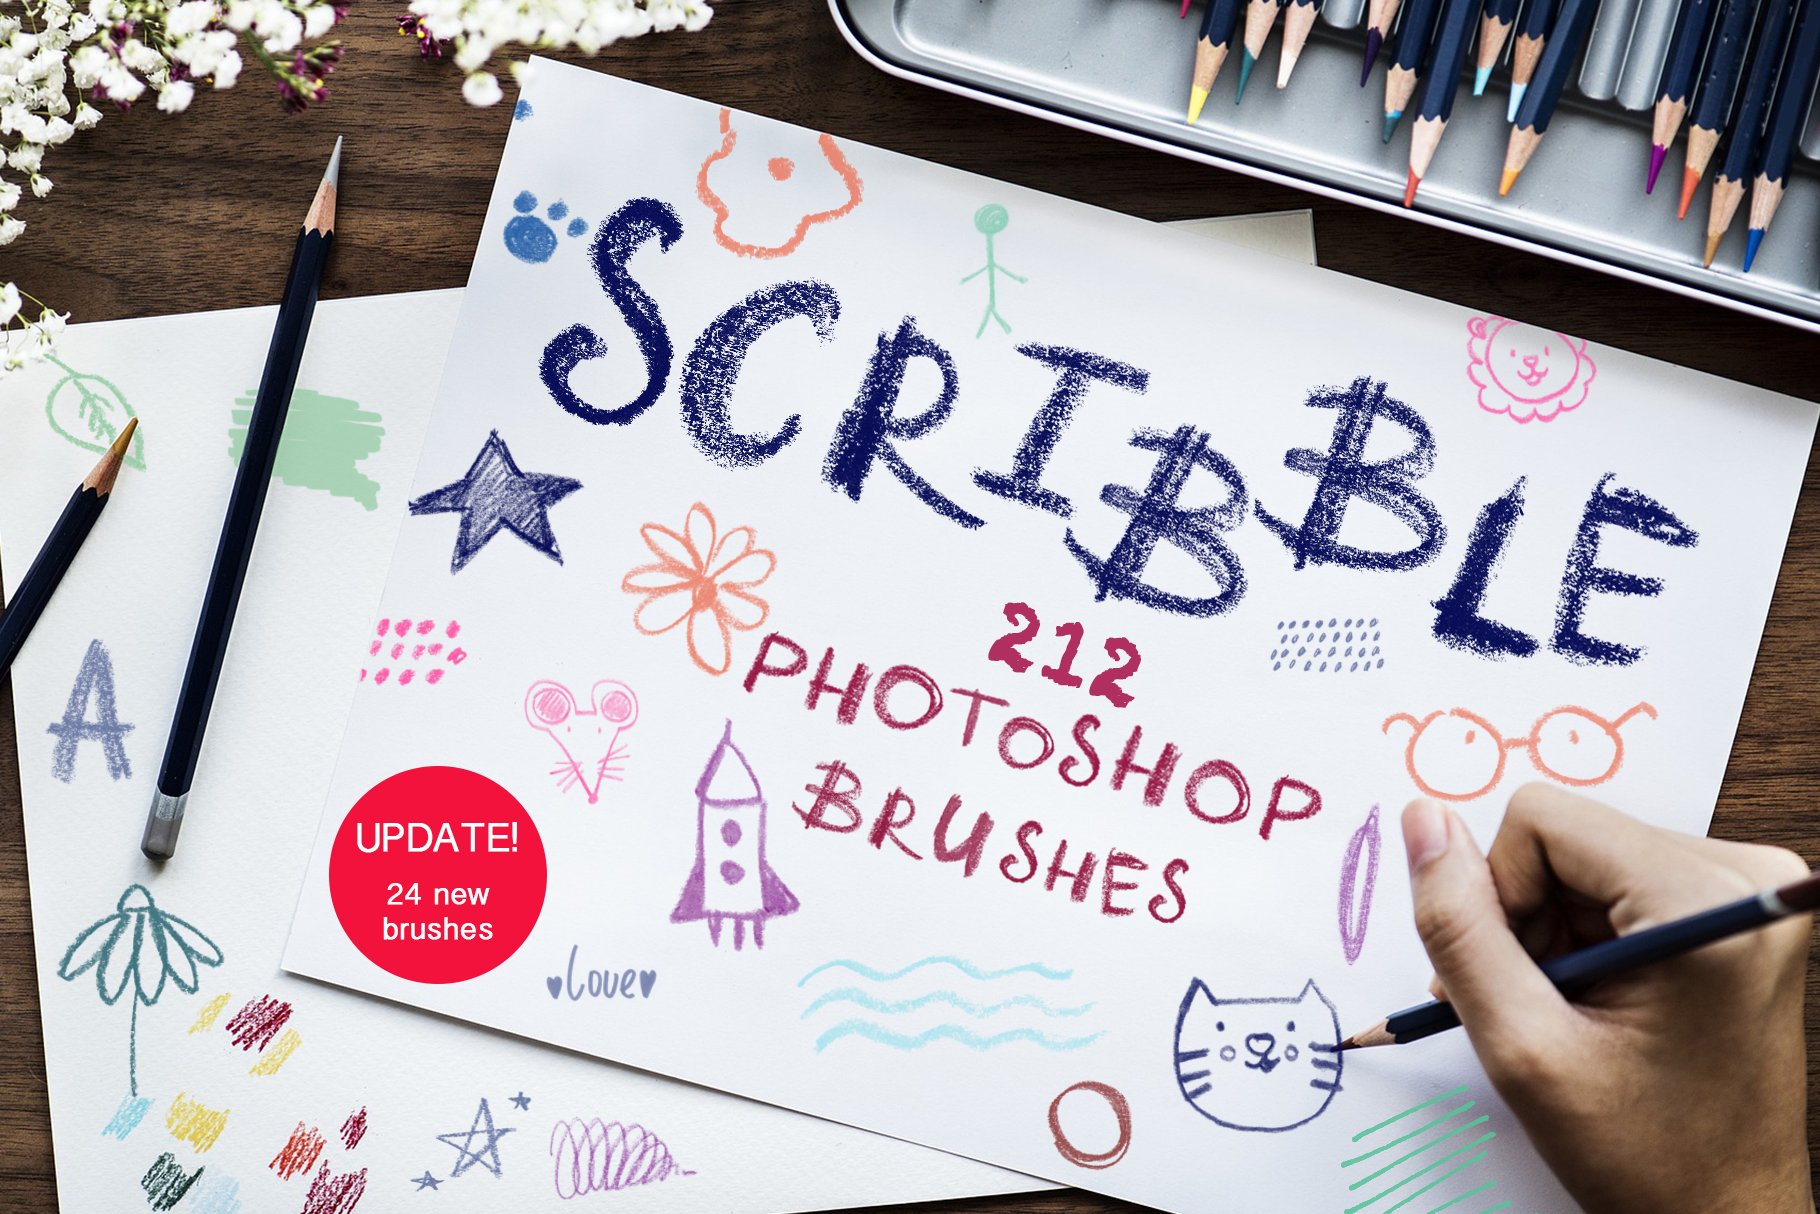 Scribble-PS Brushescover image.